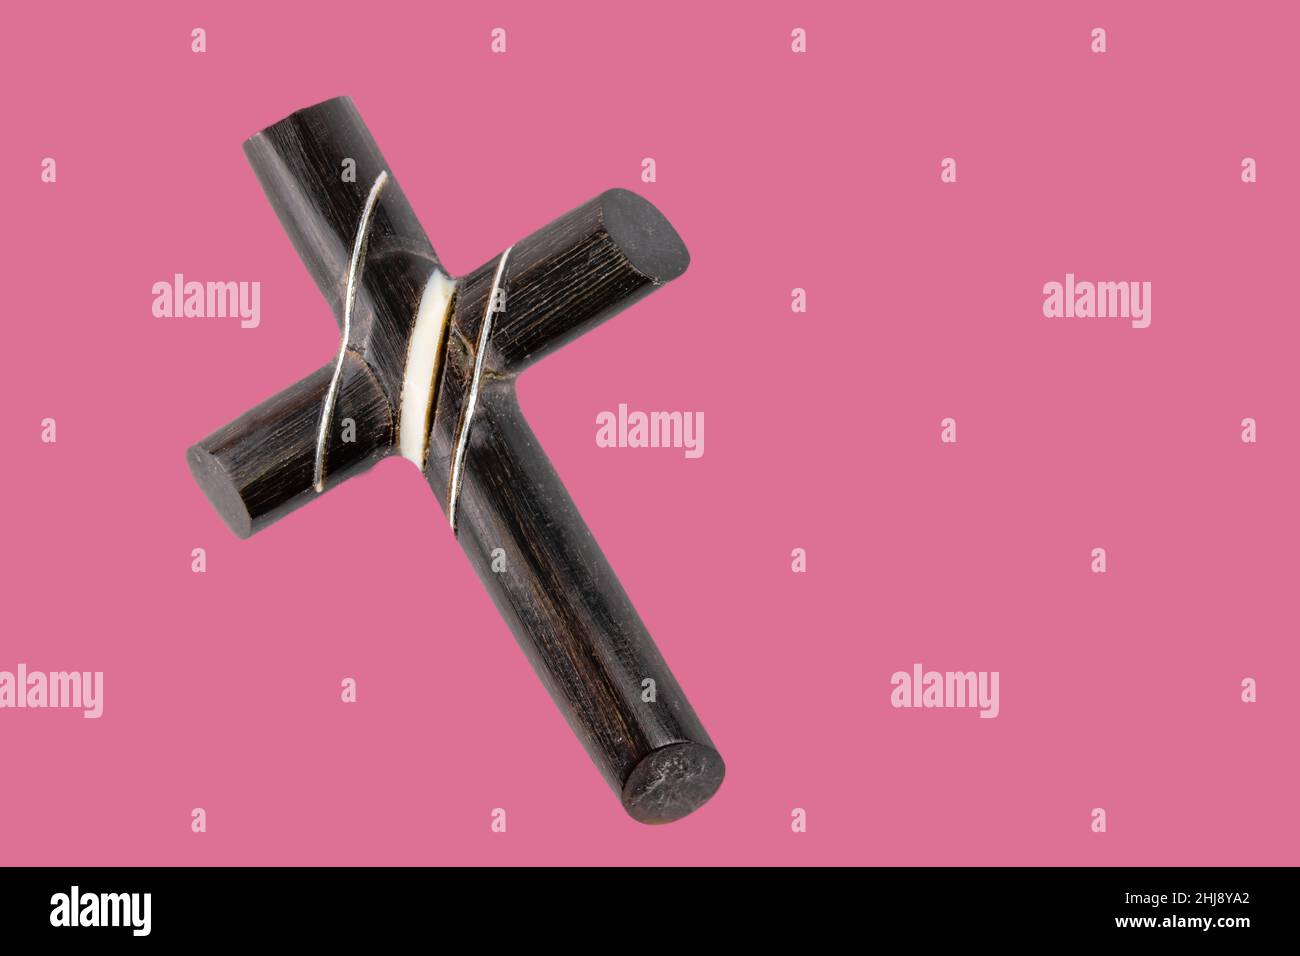 Christian cross symbol over a pink background Stock Photo